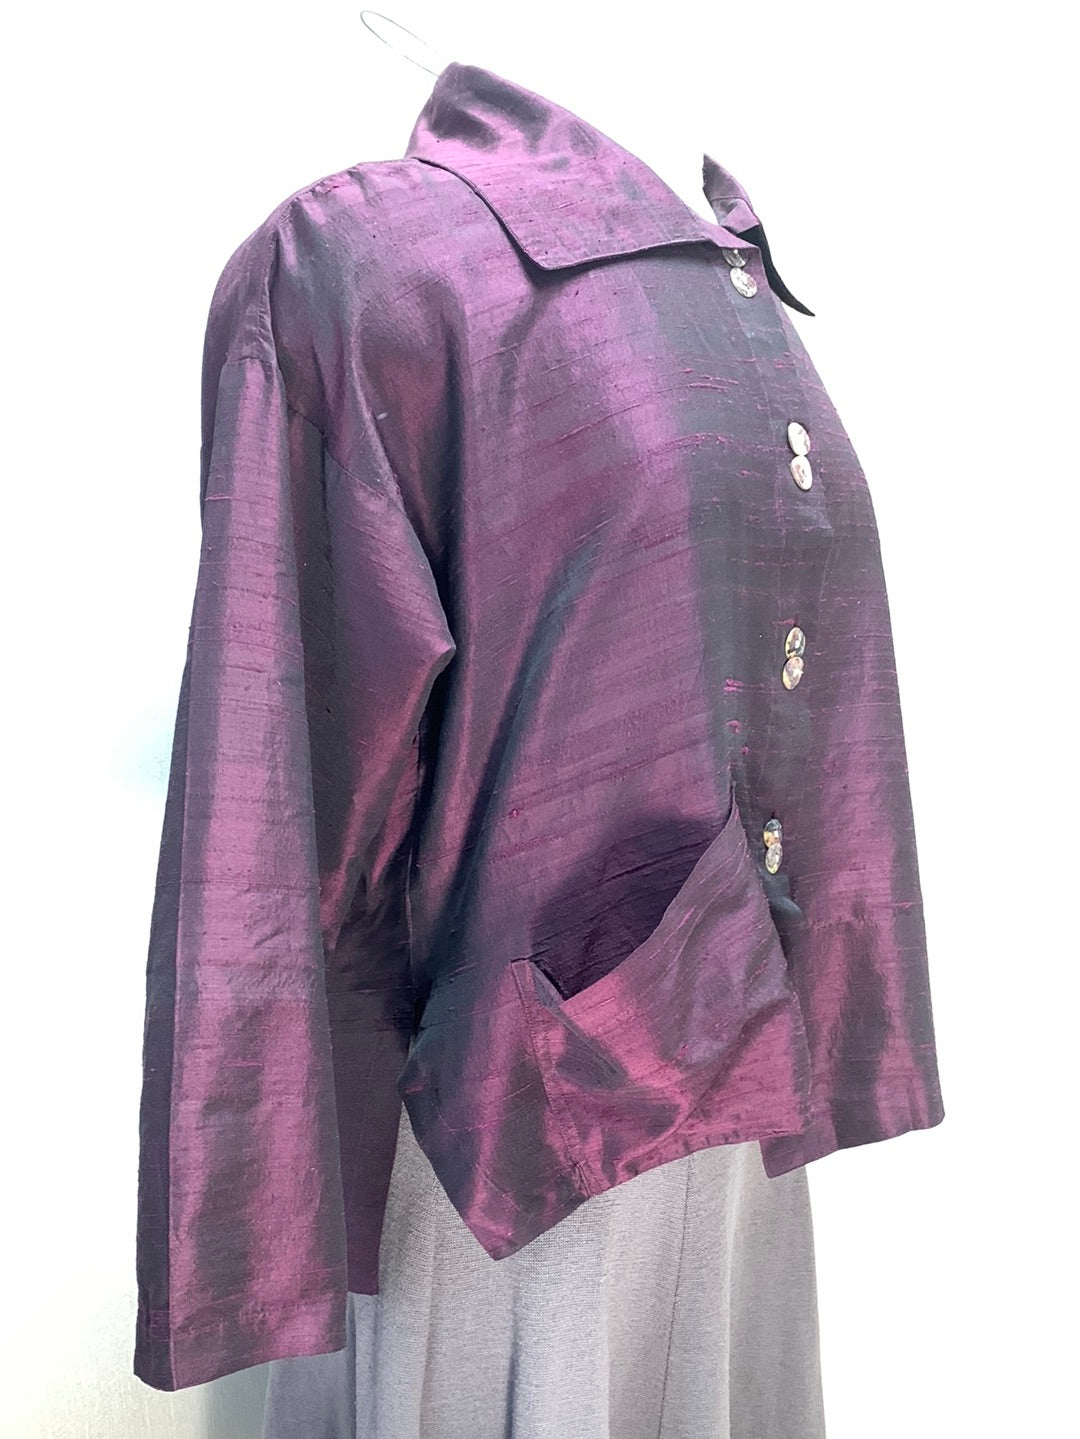 ANU by NATURAL wine black Pure Silk Long Sleeve Button Up Top - L / XL